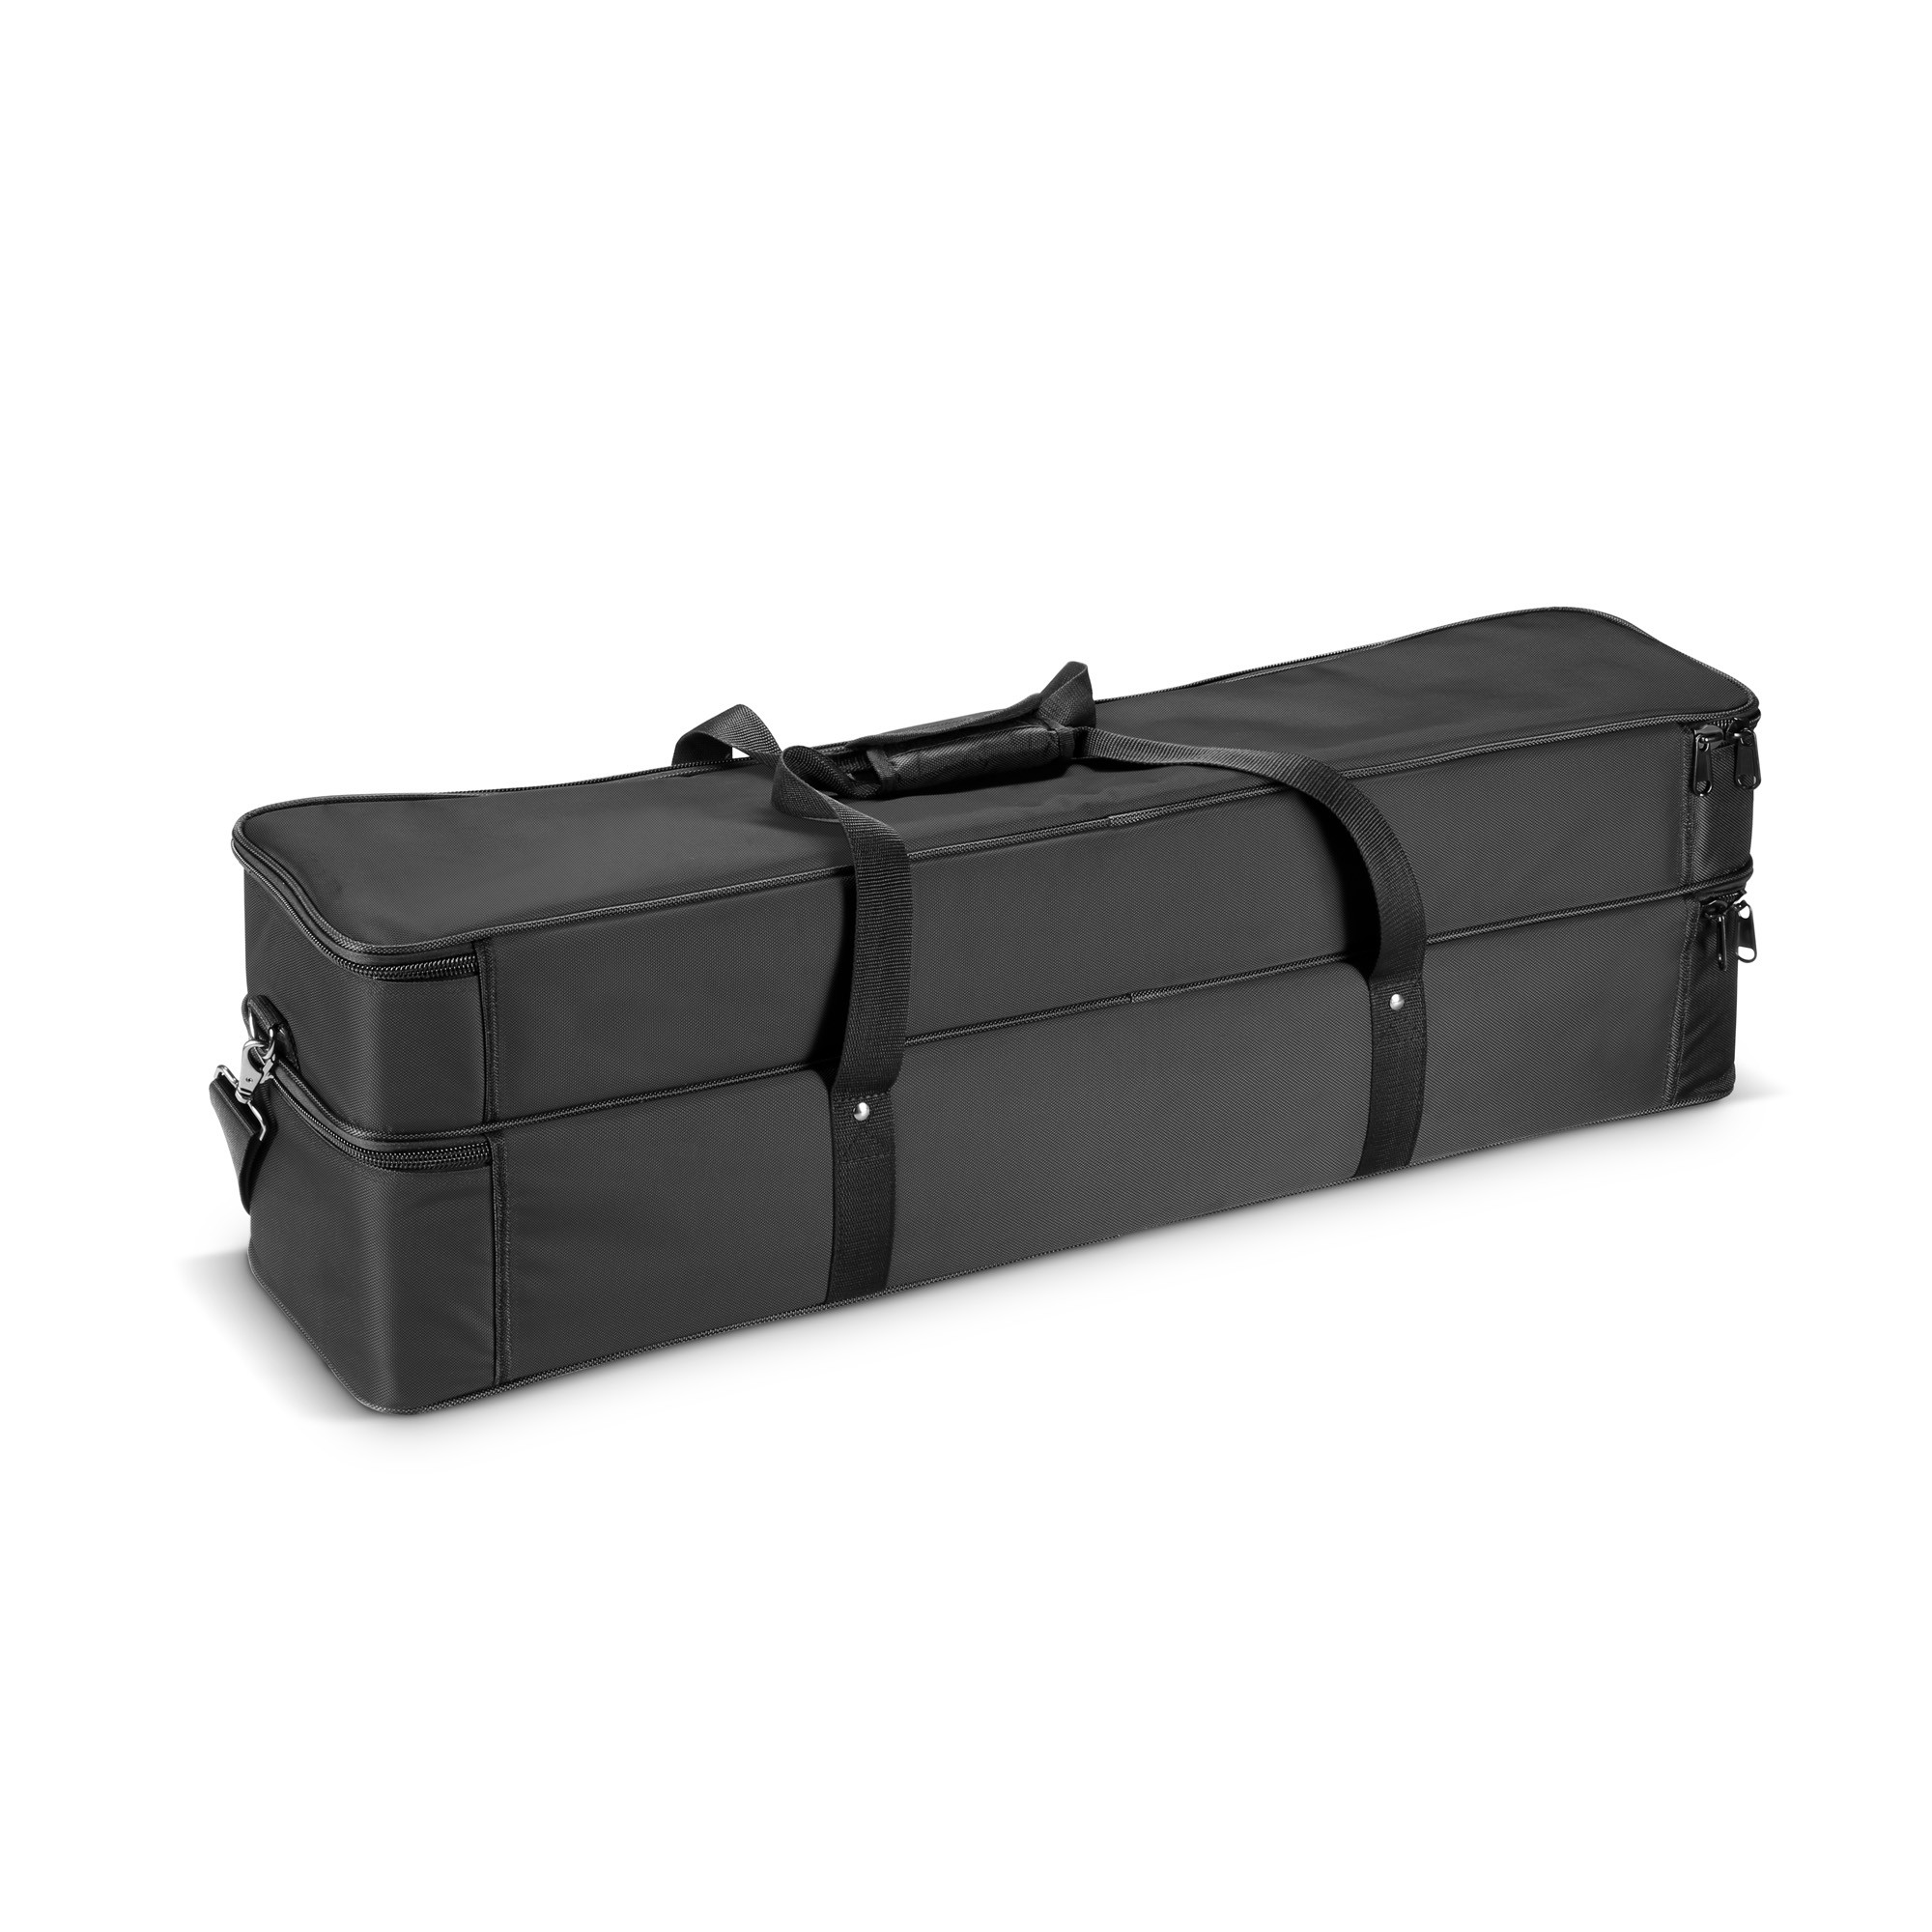 Ld Systems Curv 500 Ts Sat Bag - Luidsprekers & subwoofer hoes - Variation 3